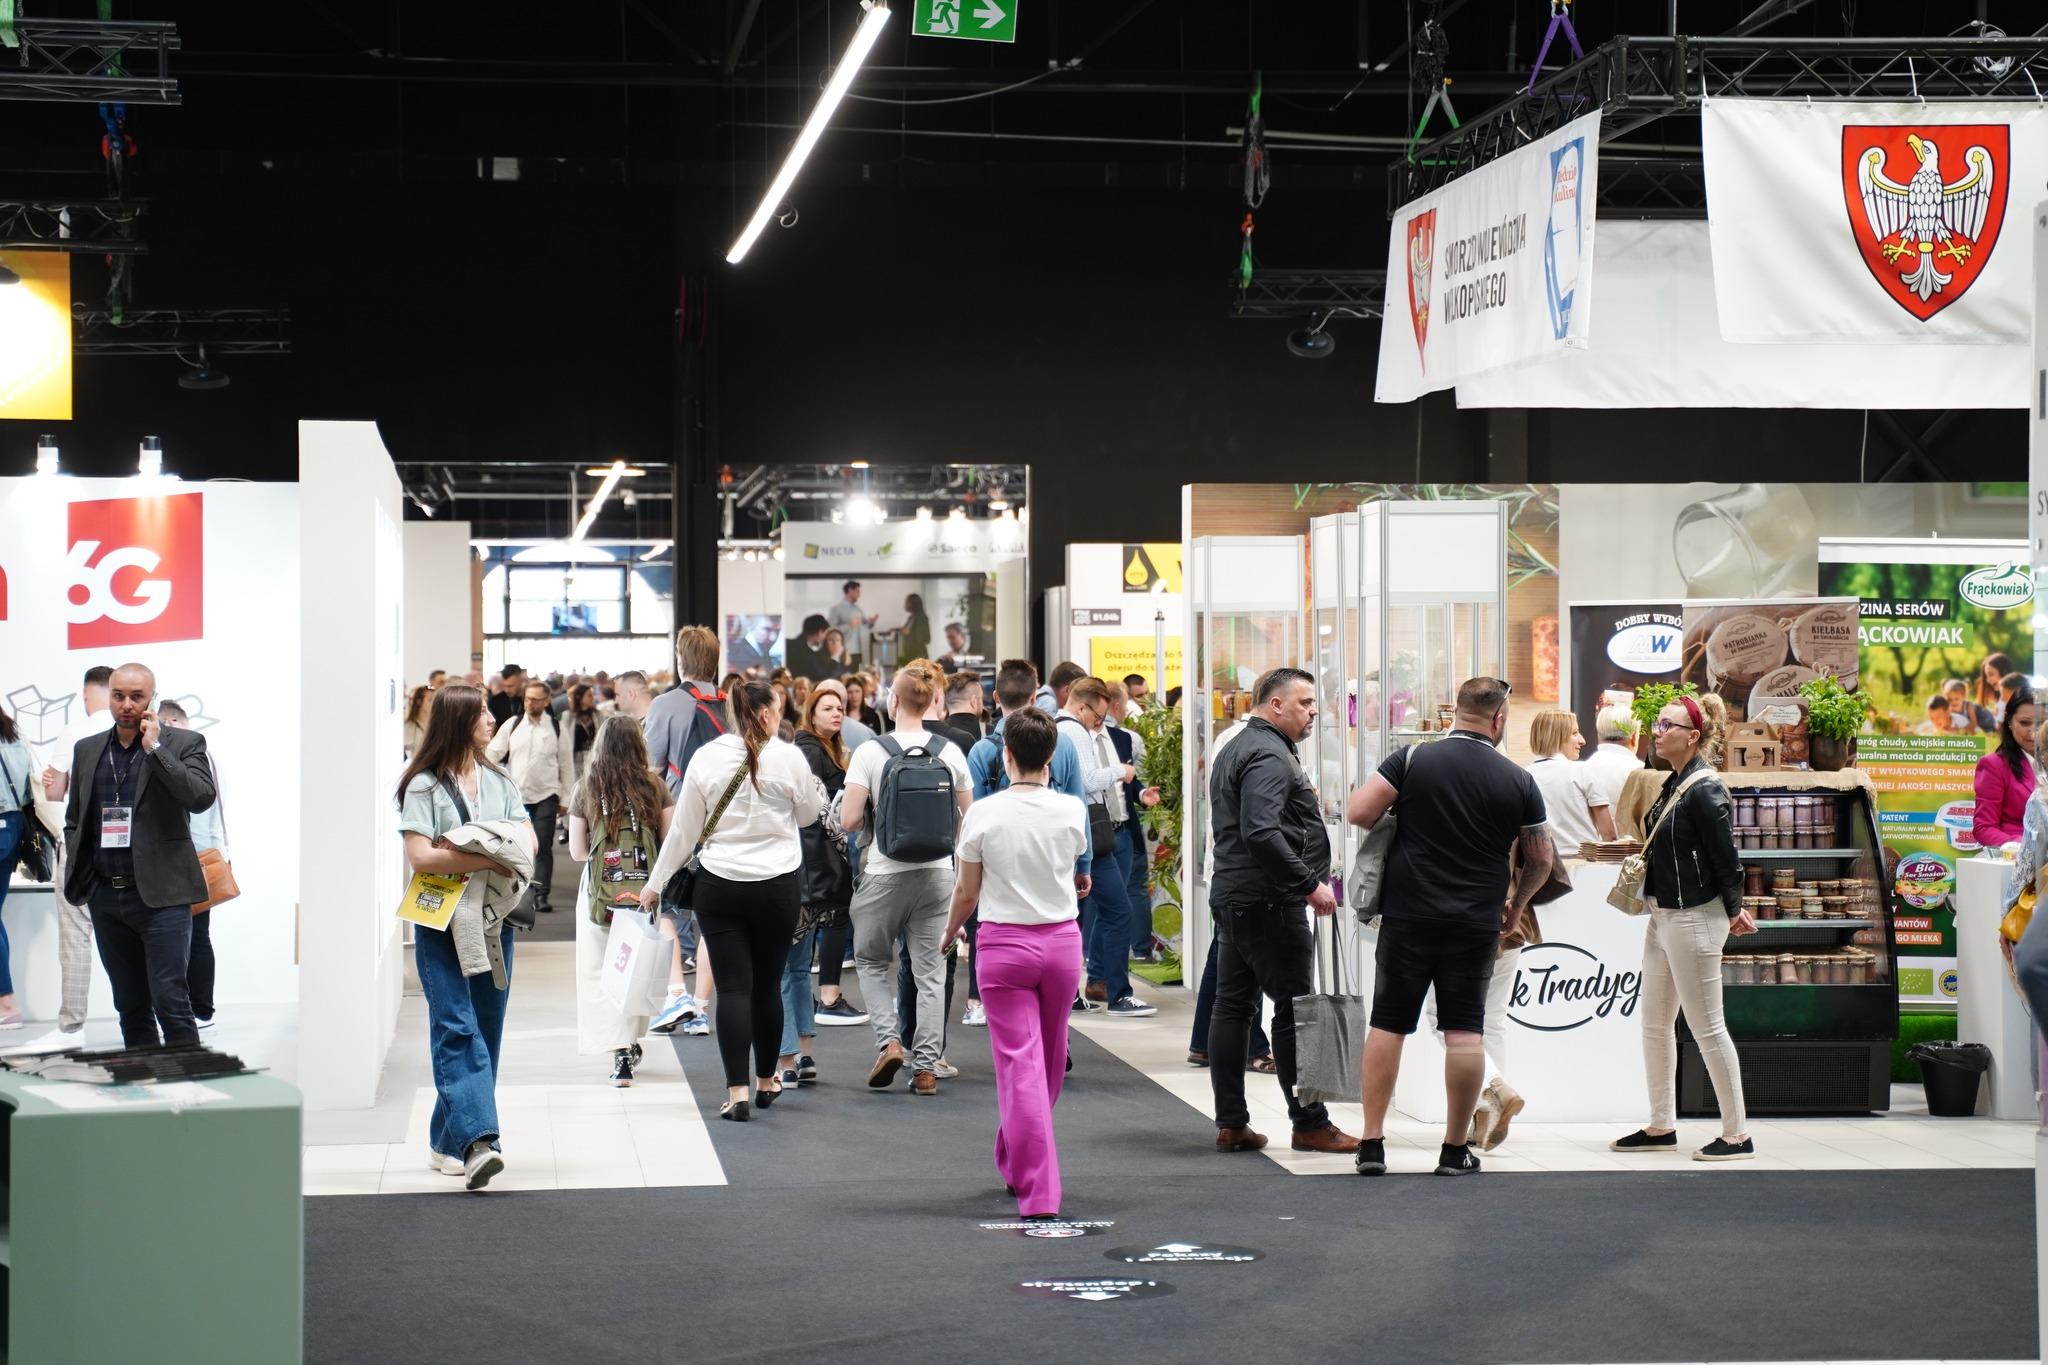 Ukraine is represented by a record number of companies at Warsaw Food Expo